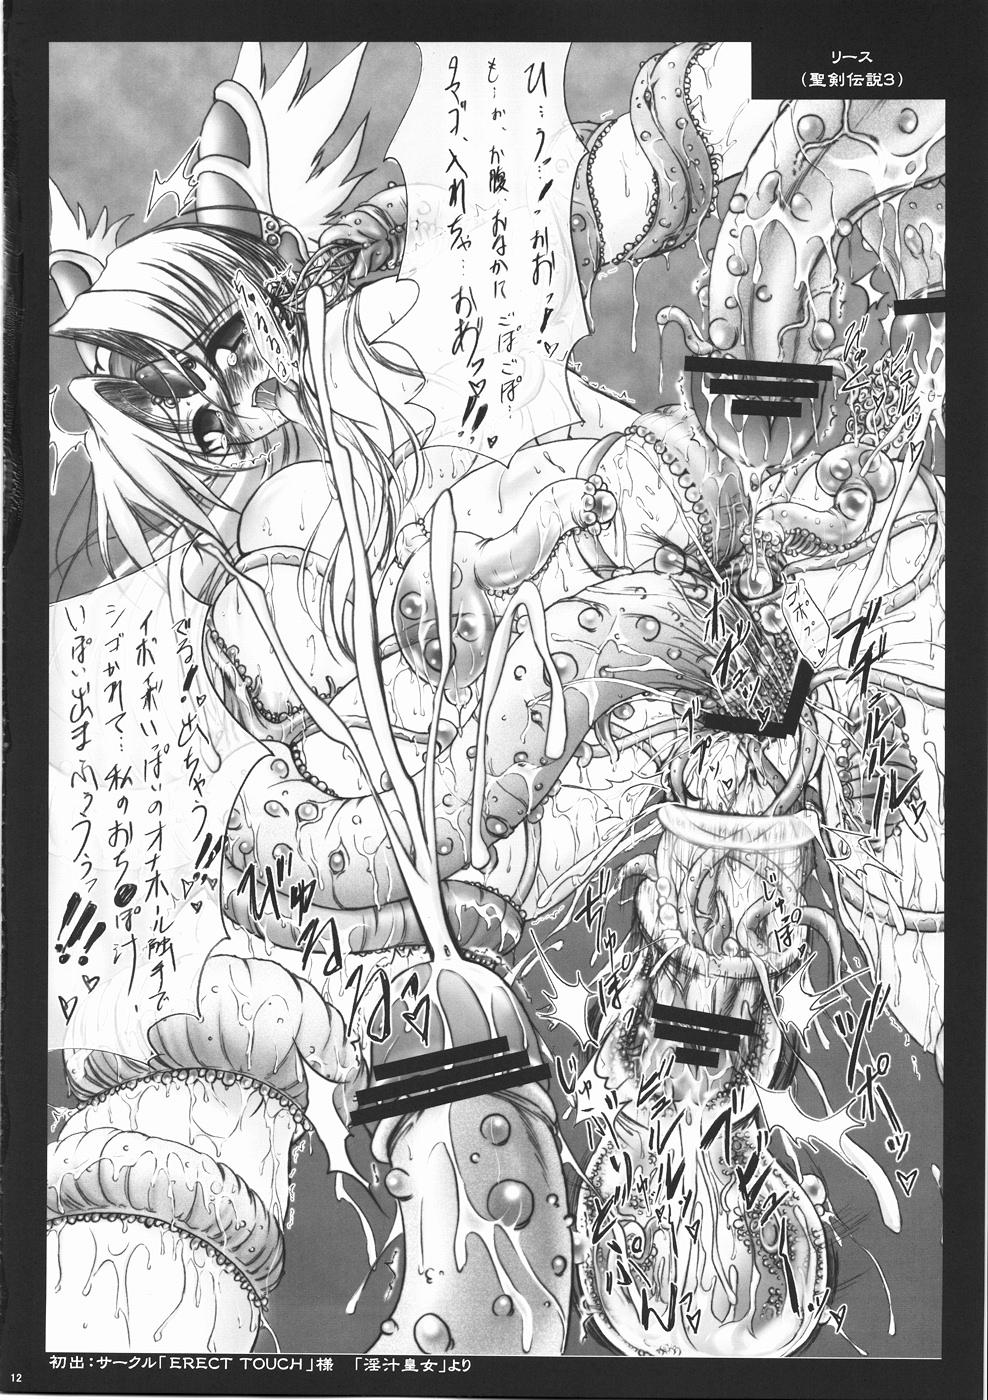 Doctor ELEMENTS "W" - Super robot wars Endless frontier Monster Dick - Page 12